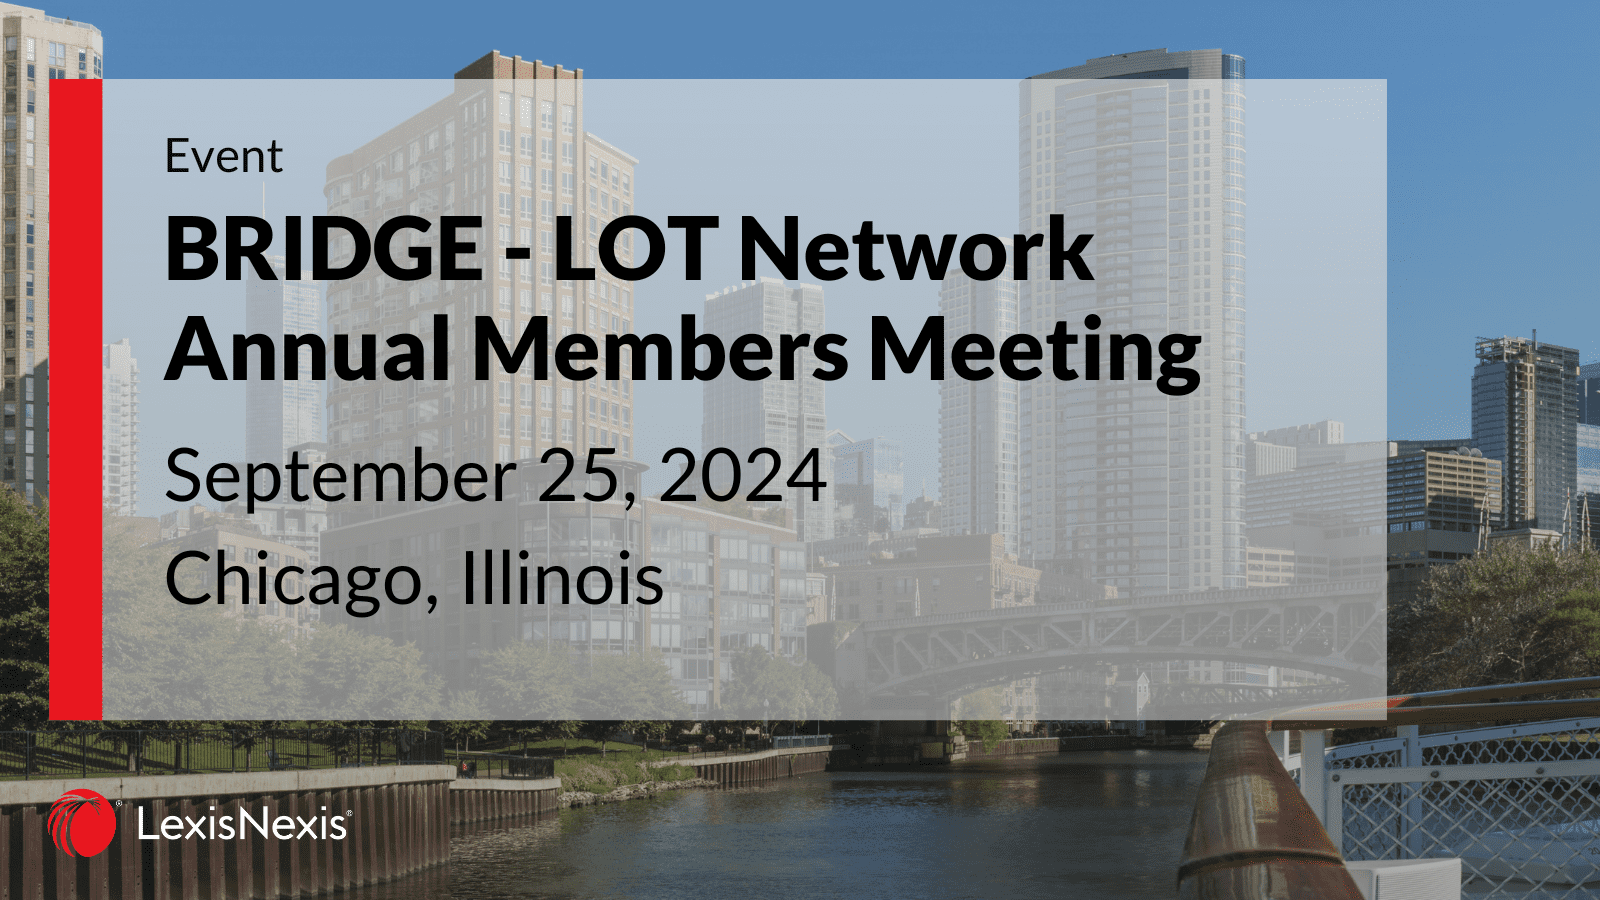 BRIDGE - LOT Network Annual Members Meeting event details with a Chicago skyline backdrop